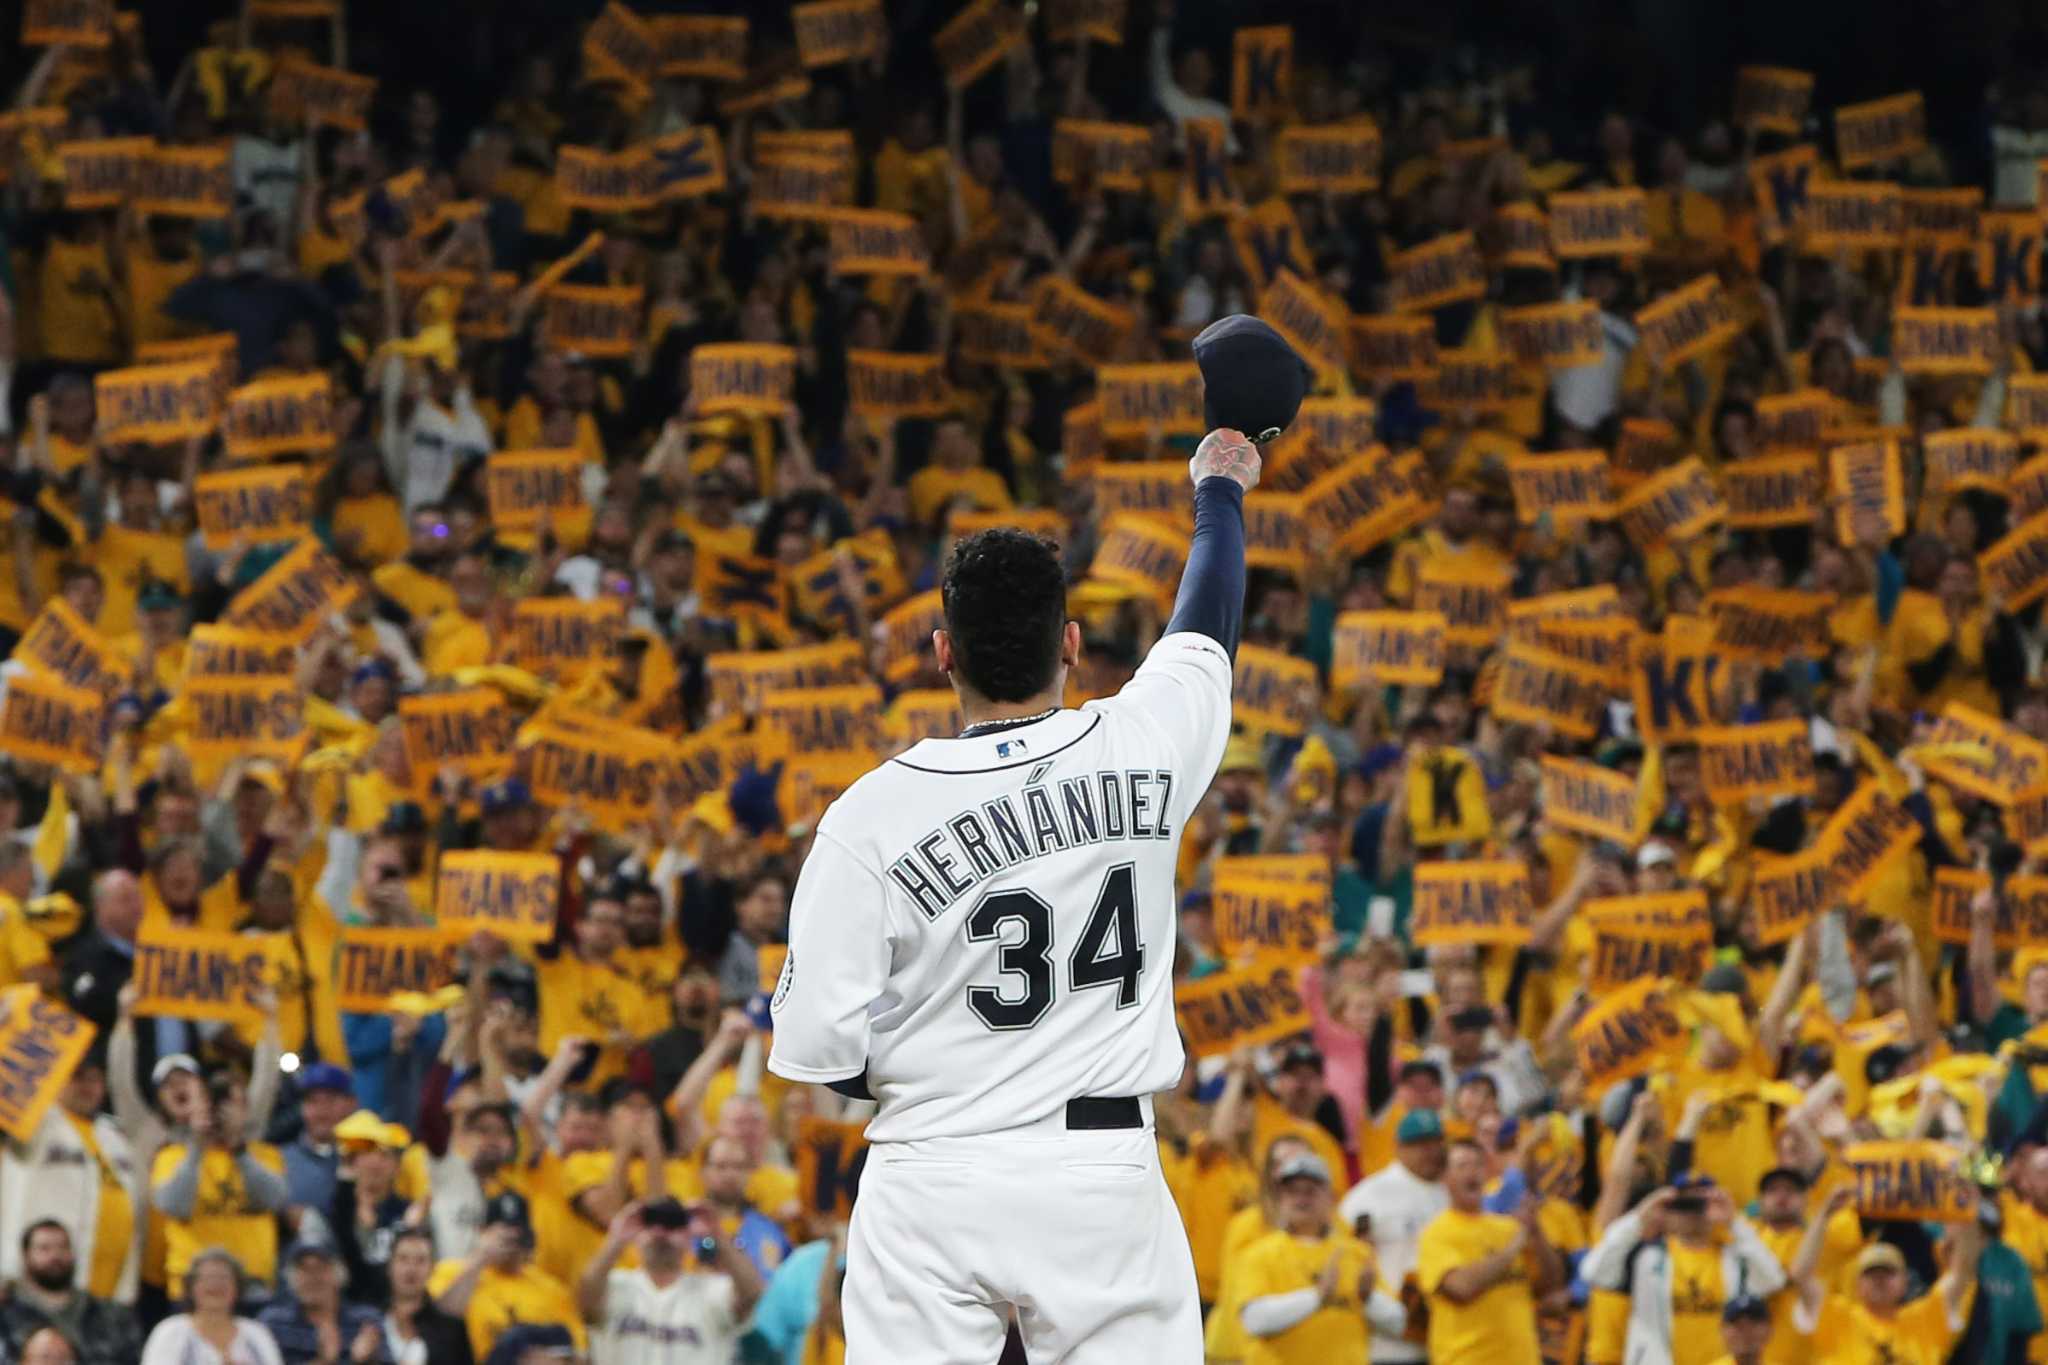 It was time': King Felix bids emotional farewell to Mariners